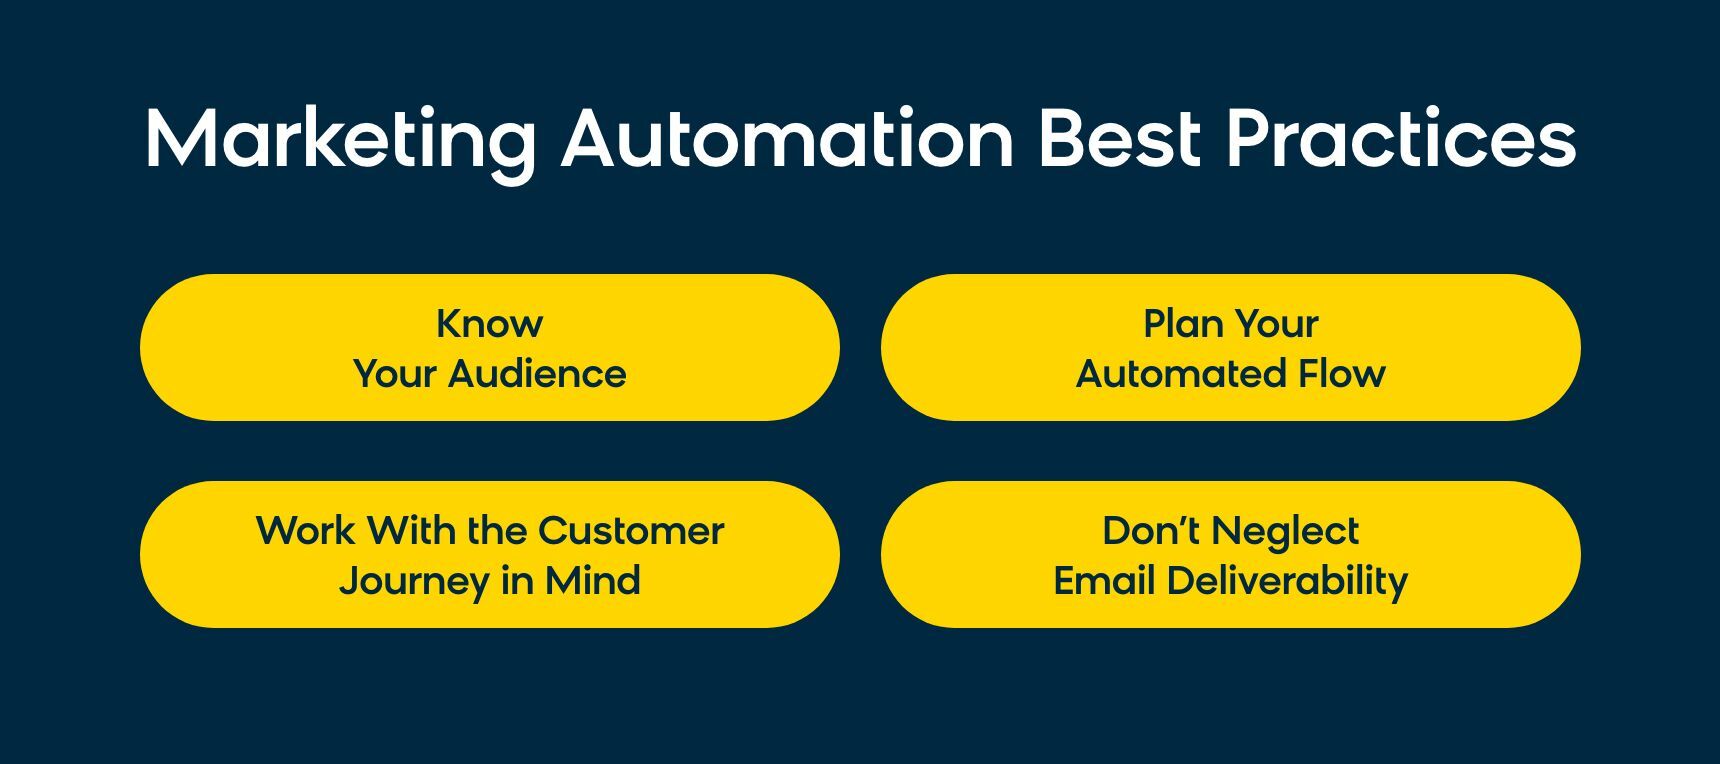 Marketing automation best practices